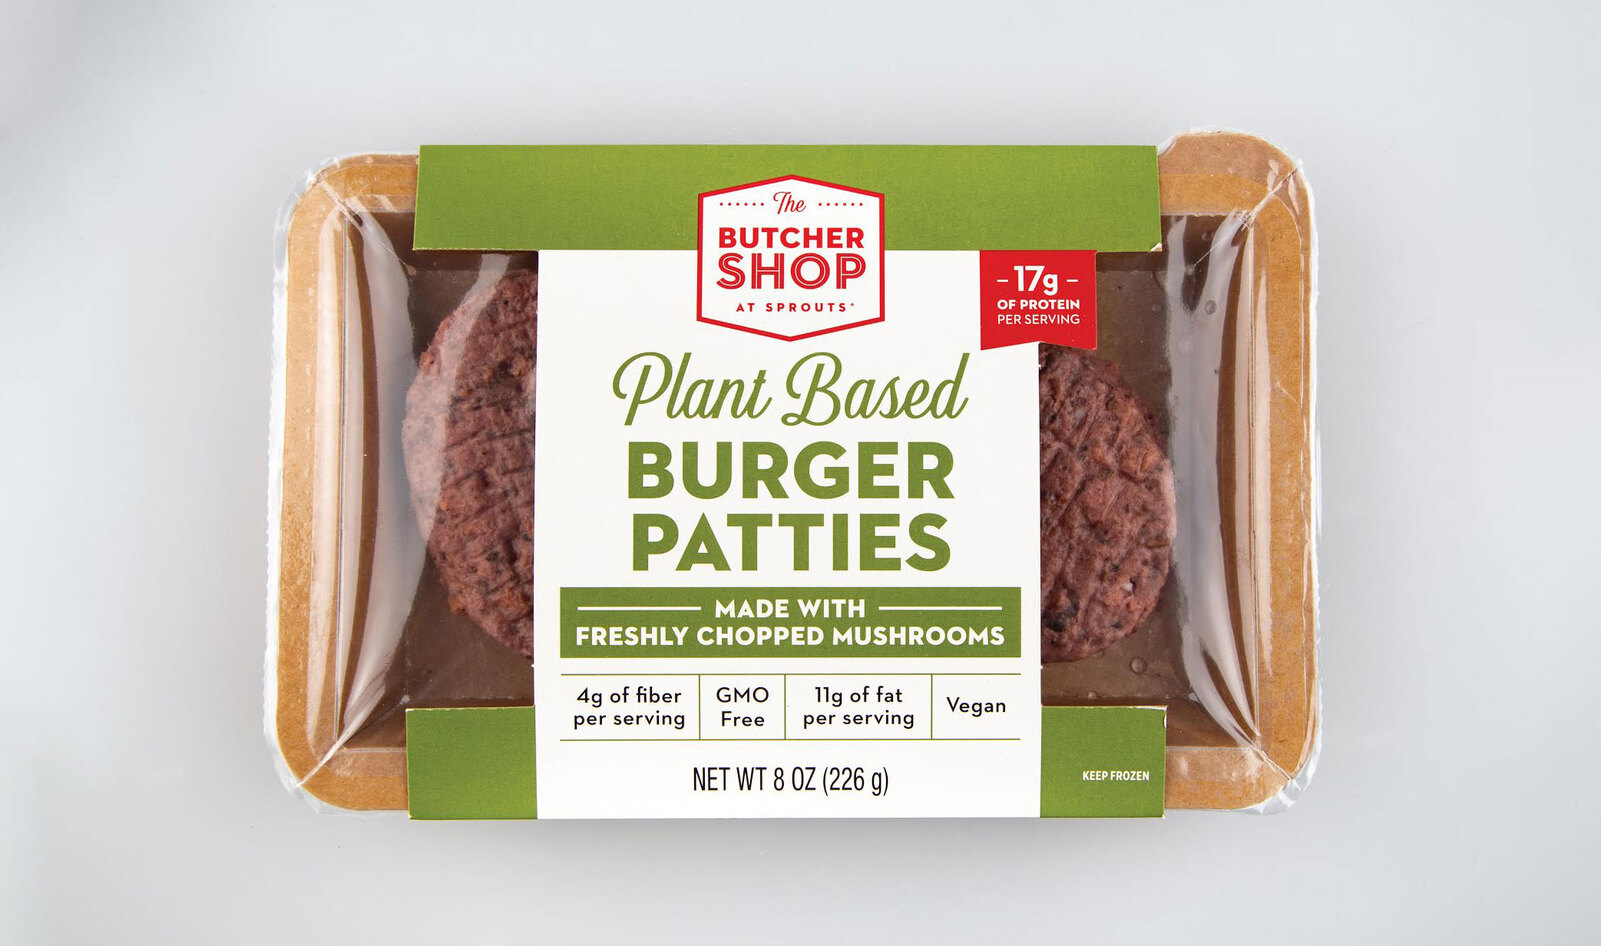 Grocery Chain Sprouts Launches Its Own Vegan Burgers